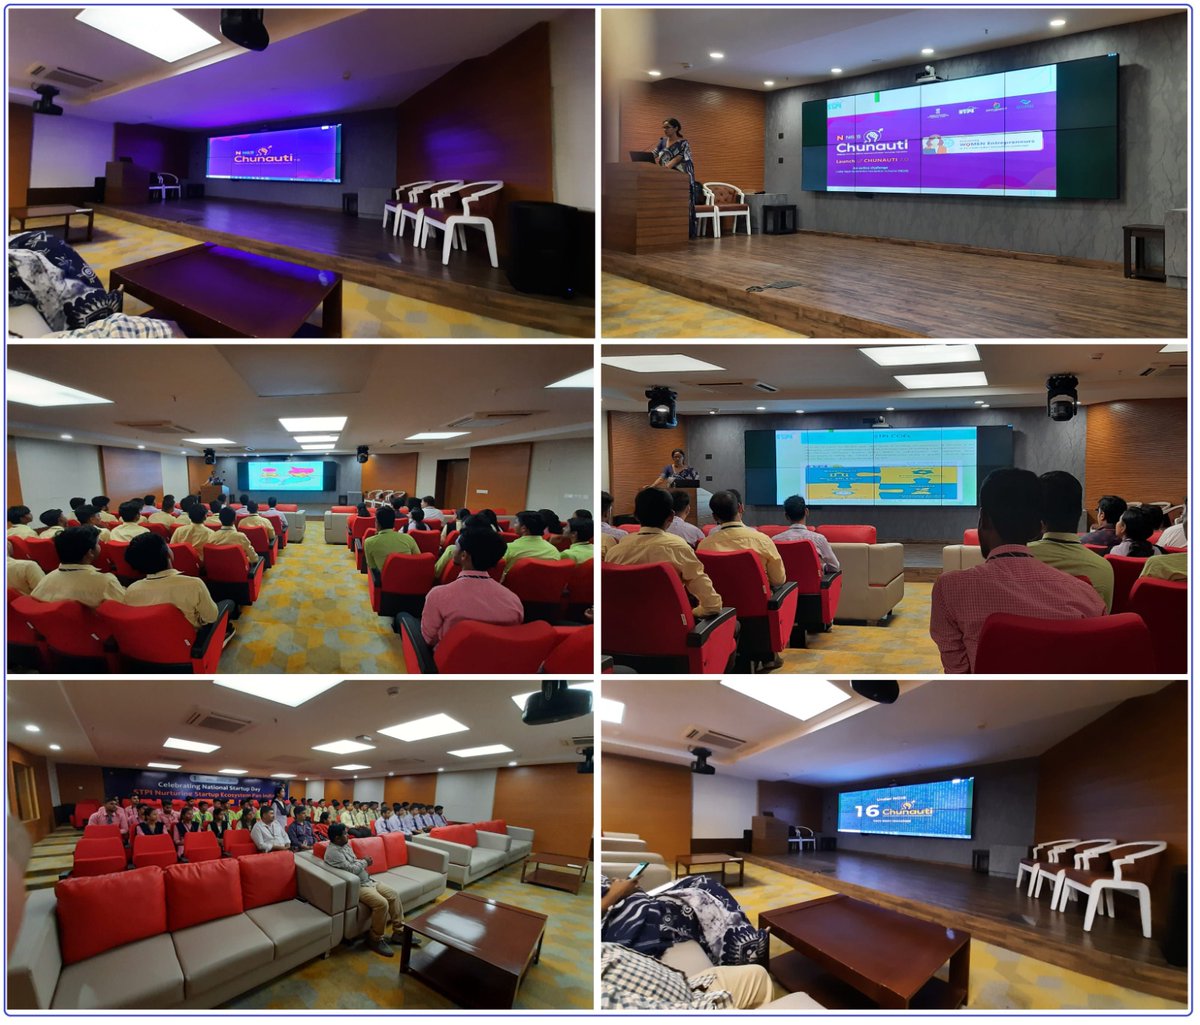 STPI Bhubaneswar @STPIBbsr organized an outreach session on #Chunauti7.0 under #NGIS of #STPIIndia for the young & innovative minds of GIET BBSR wherein they were enlightened on the benefits & encouraged to be part of Innovativeness. @GoI_MeitY @StpiIndia @Arvindtw